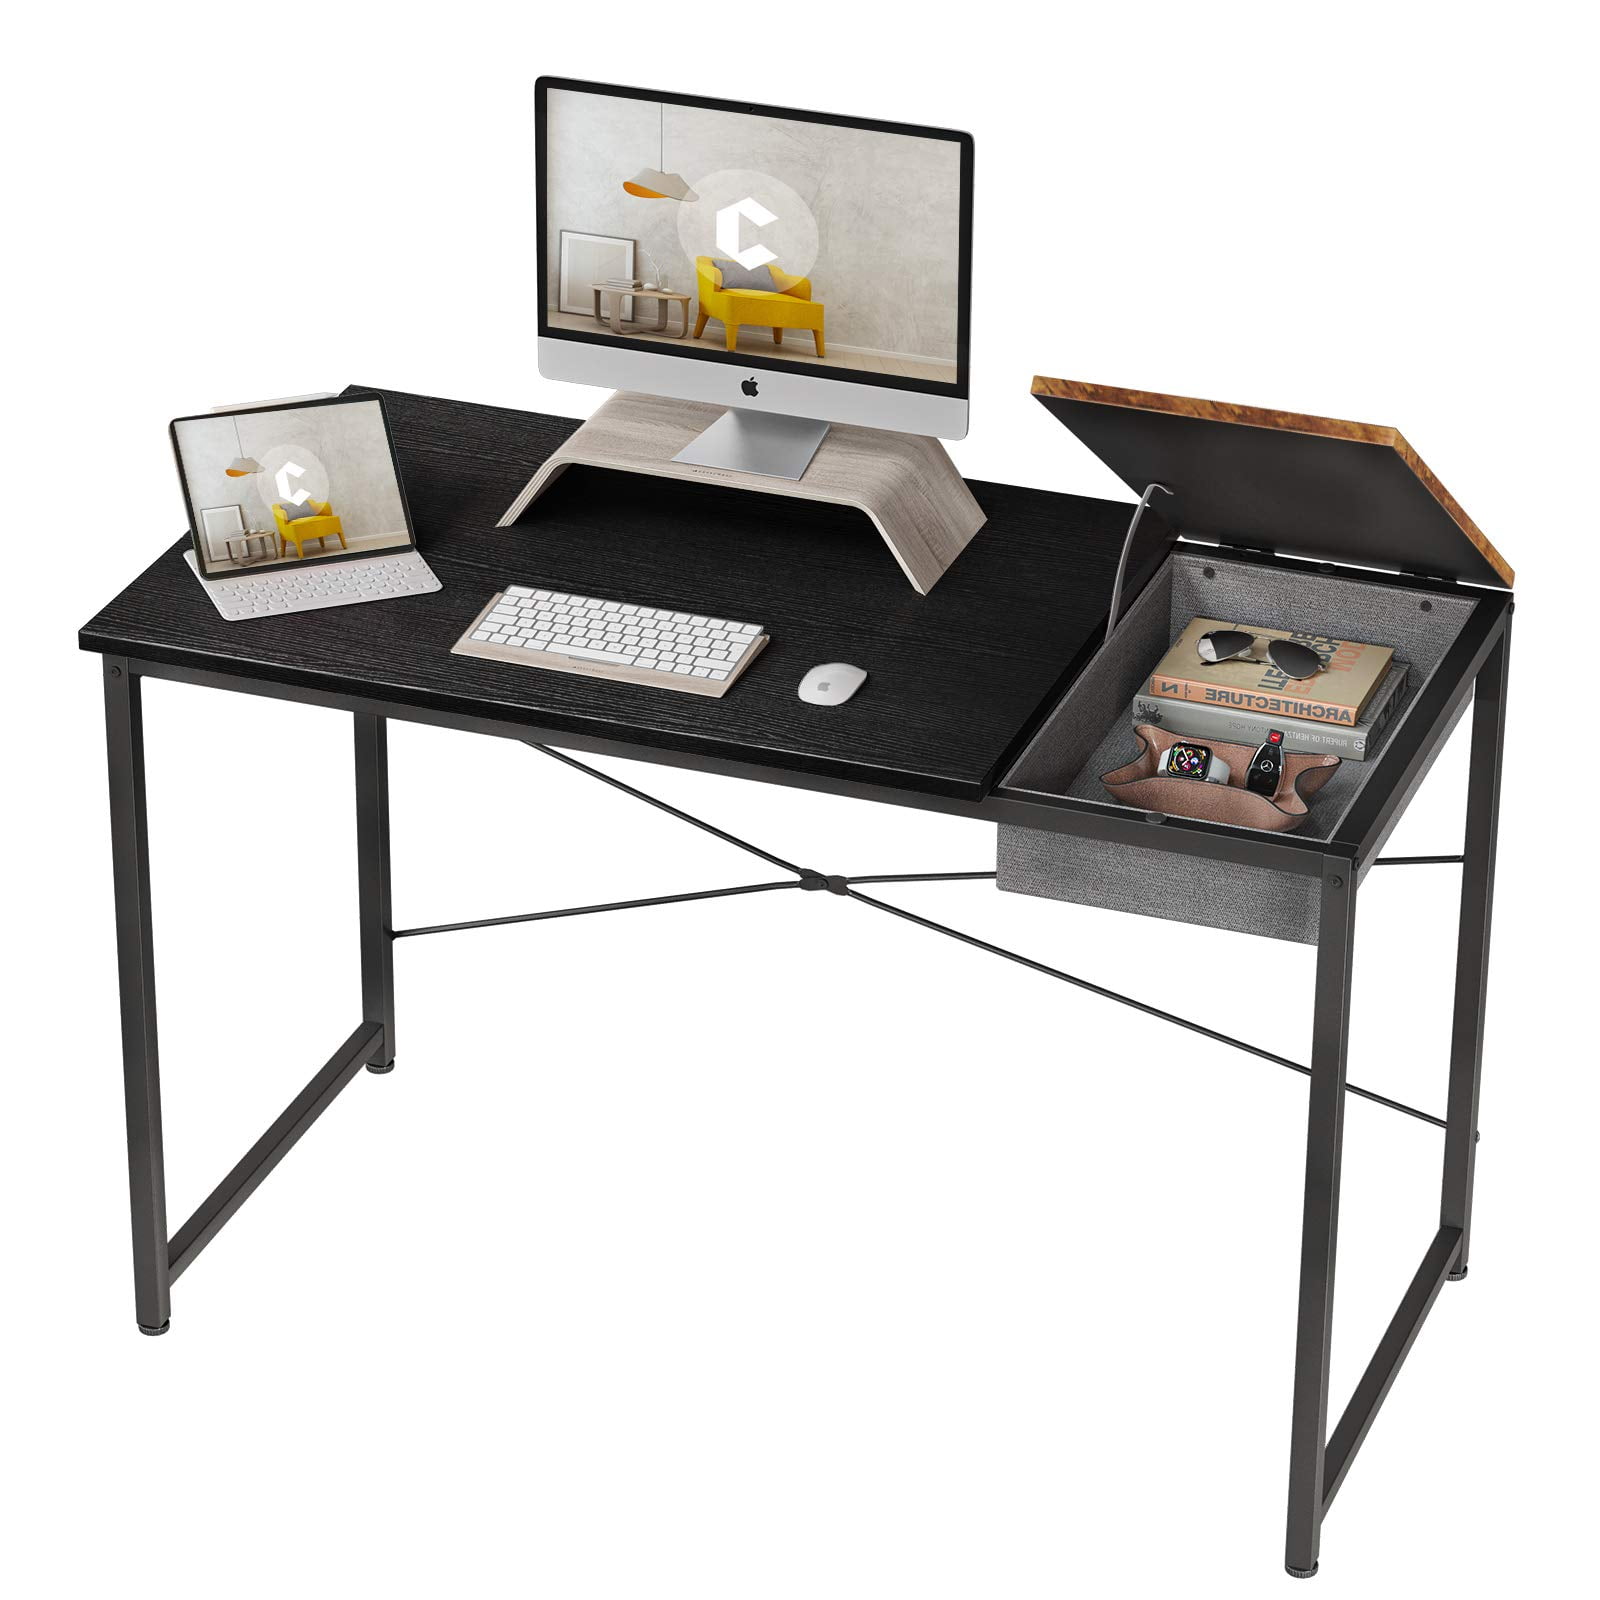 Black Espresso Cubiker Writing Computer Desk 39 Home Office Study Laptop Table Modern Simple Style Desk with Drawer